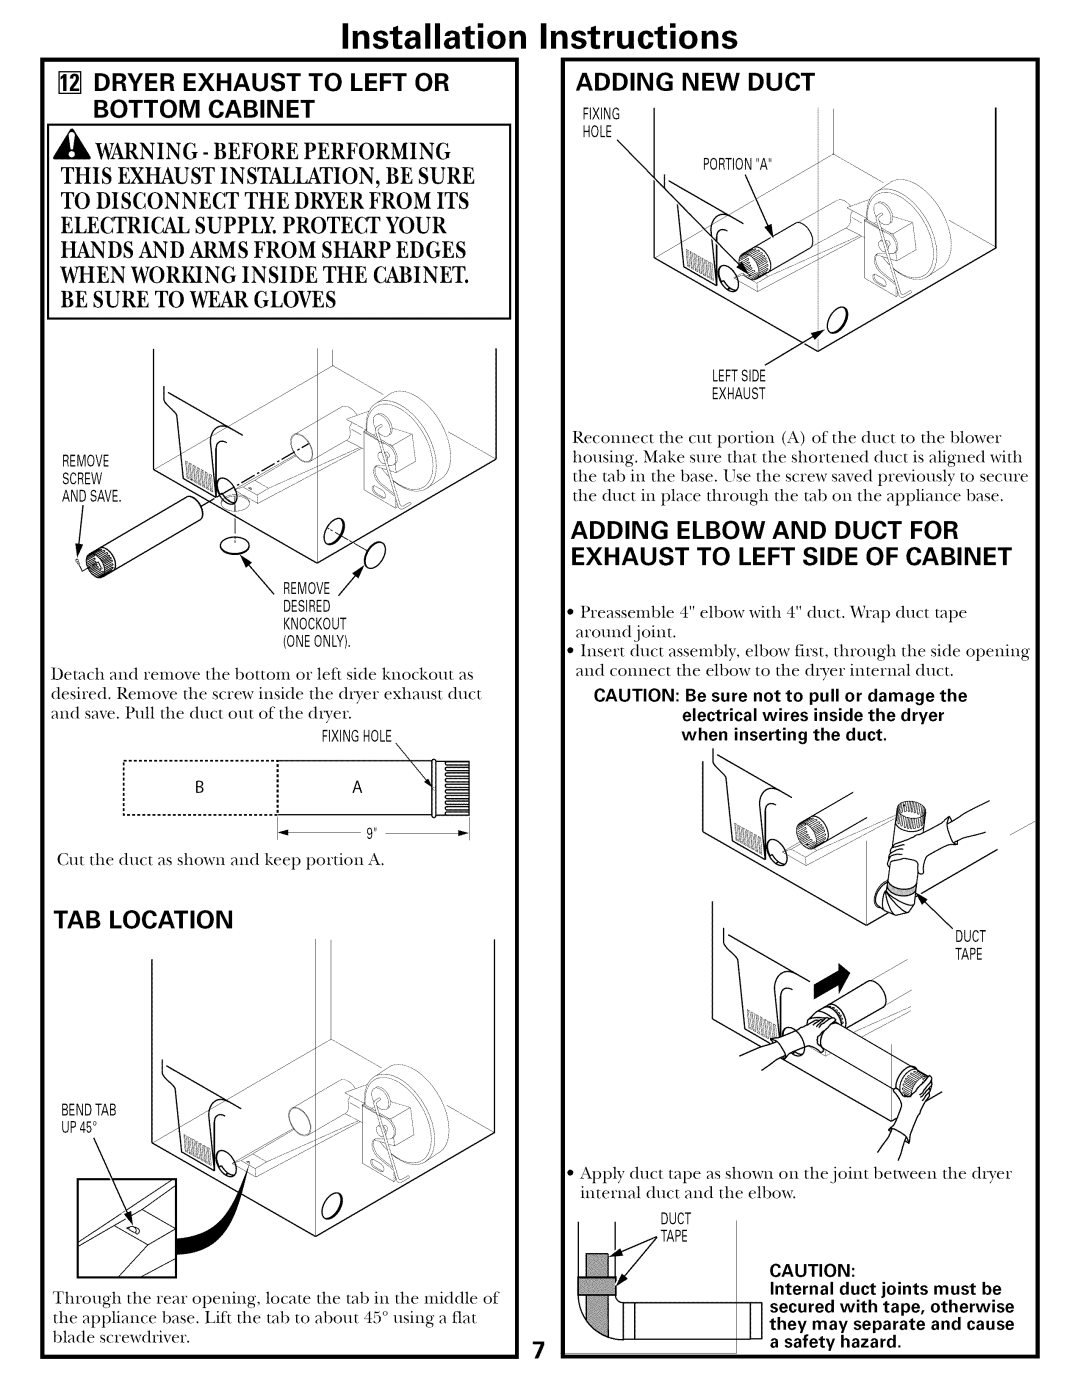 GE 500A436P006 installation instructions Dryer Exhaust to Left or Bottom Cabinet, Adding NEW Duct, TAB Location 